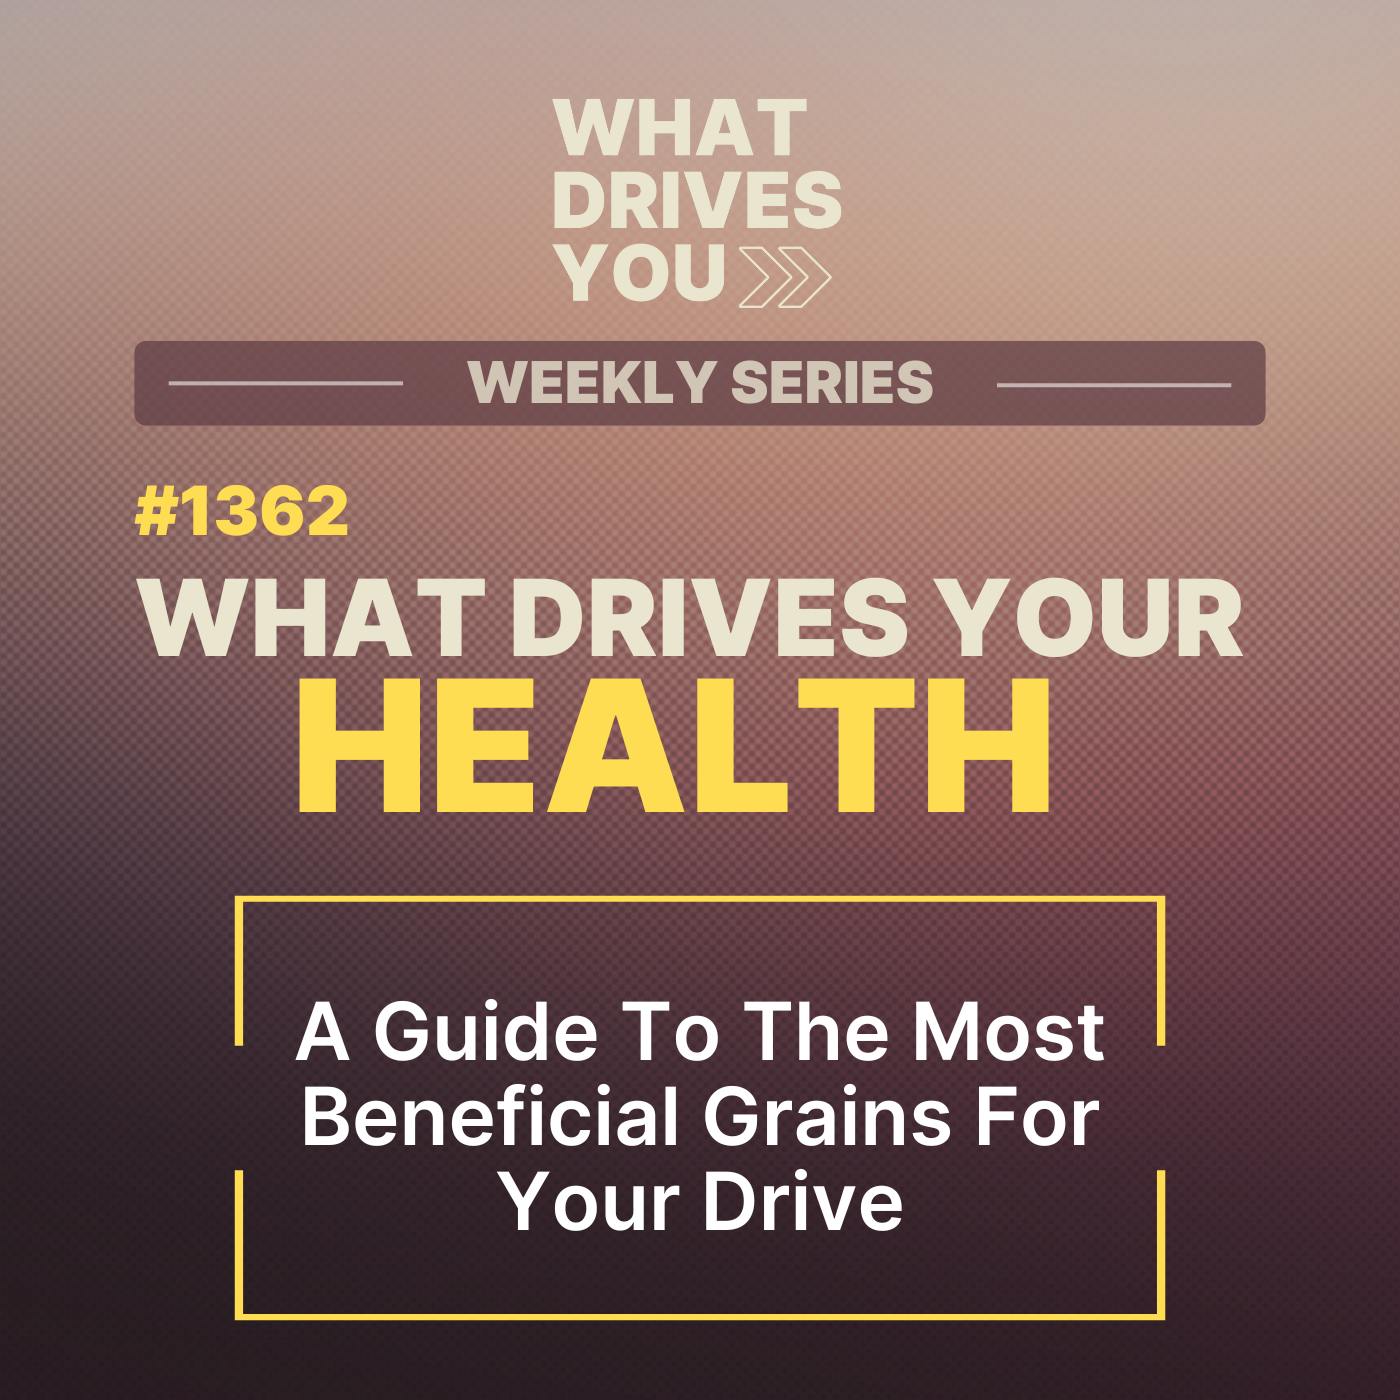 A Guide To The Most Beneficial Grains For Your Drive